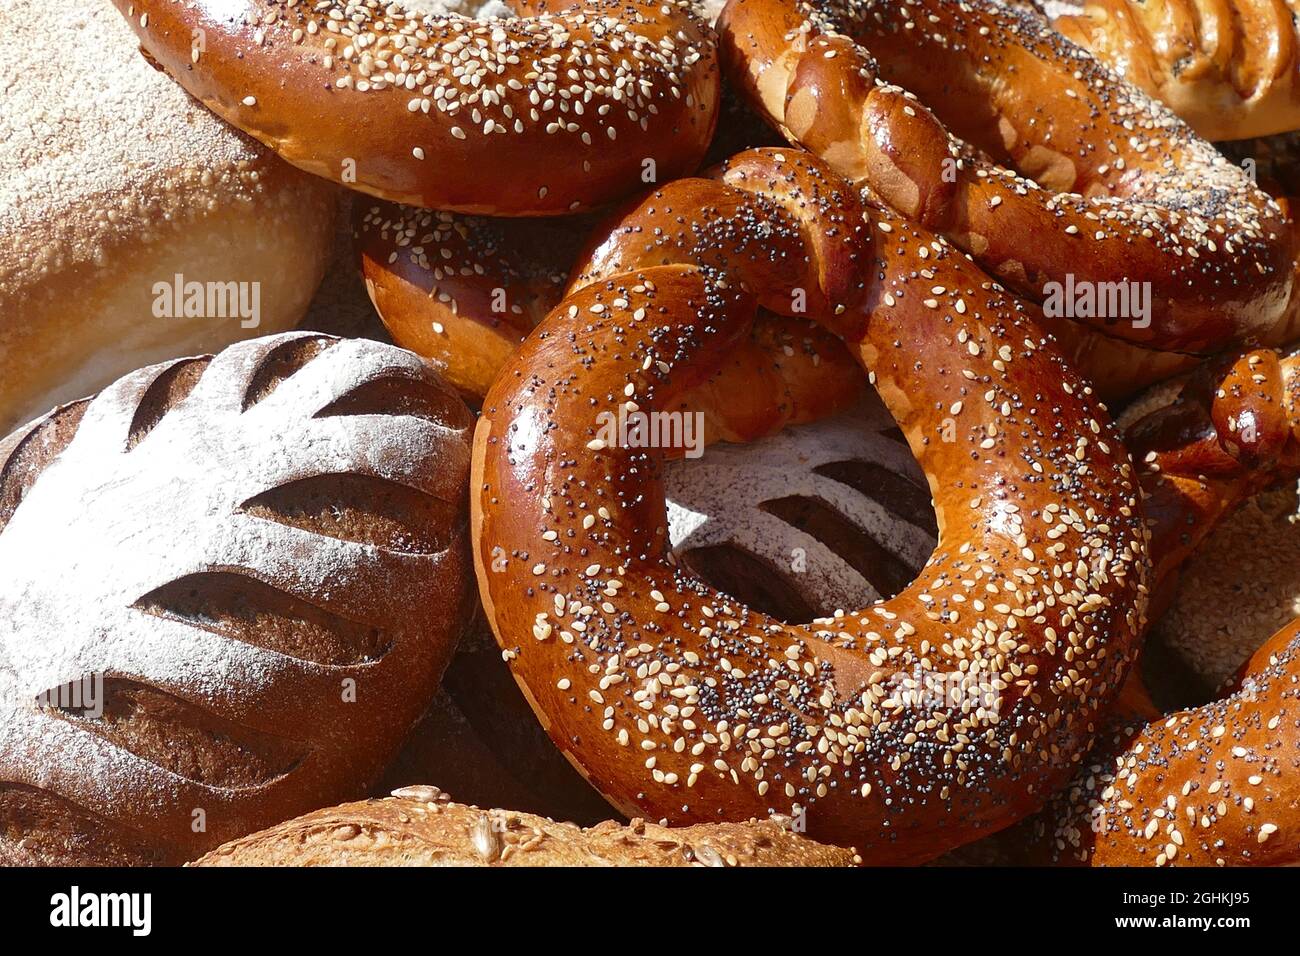 Non Exclusive: IVANO-FRANKIVSK, UKRAINE - SEPTEMBER 5, 2021 - Kolaches (ring-shaped bread) are on display during the Bread Festival 2021 in Ivano-Fran Stock Photo